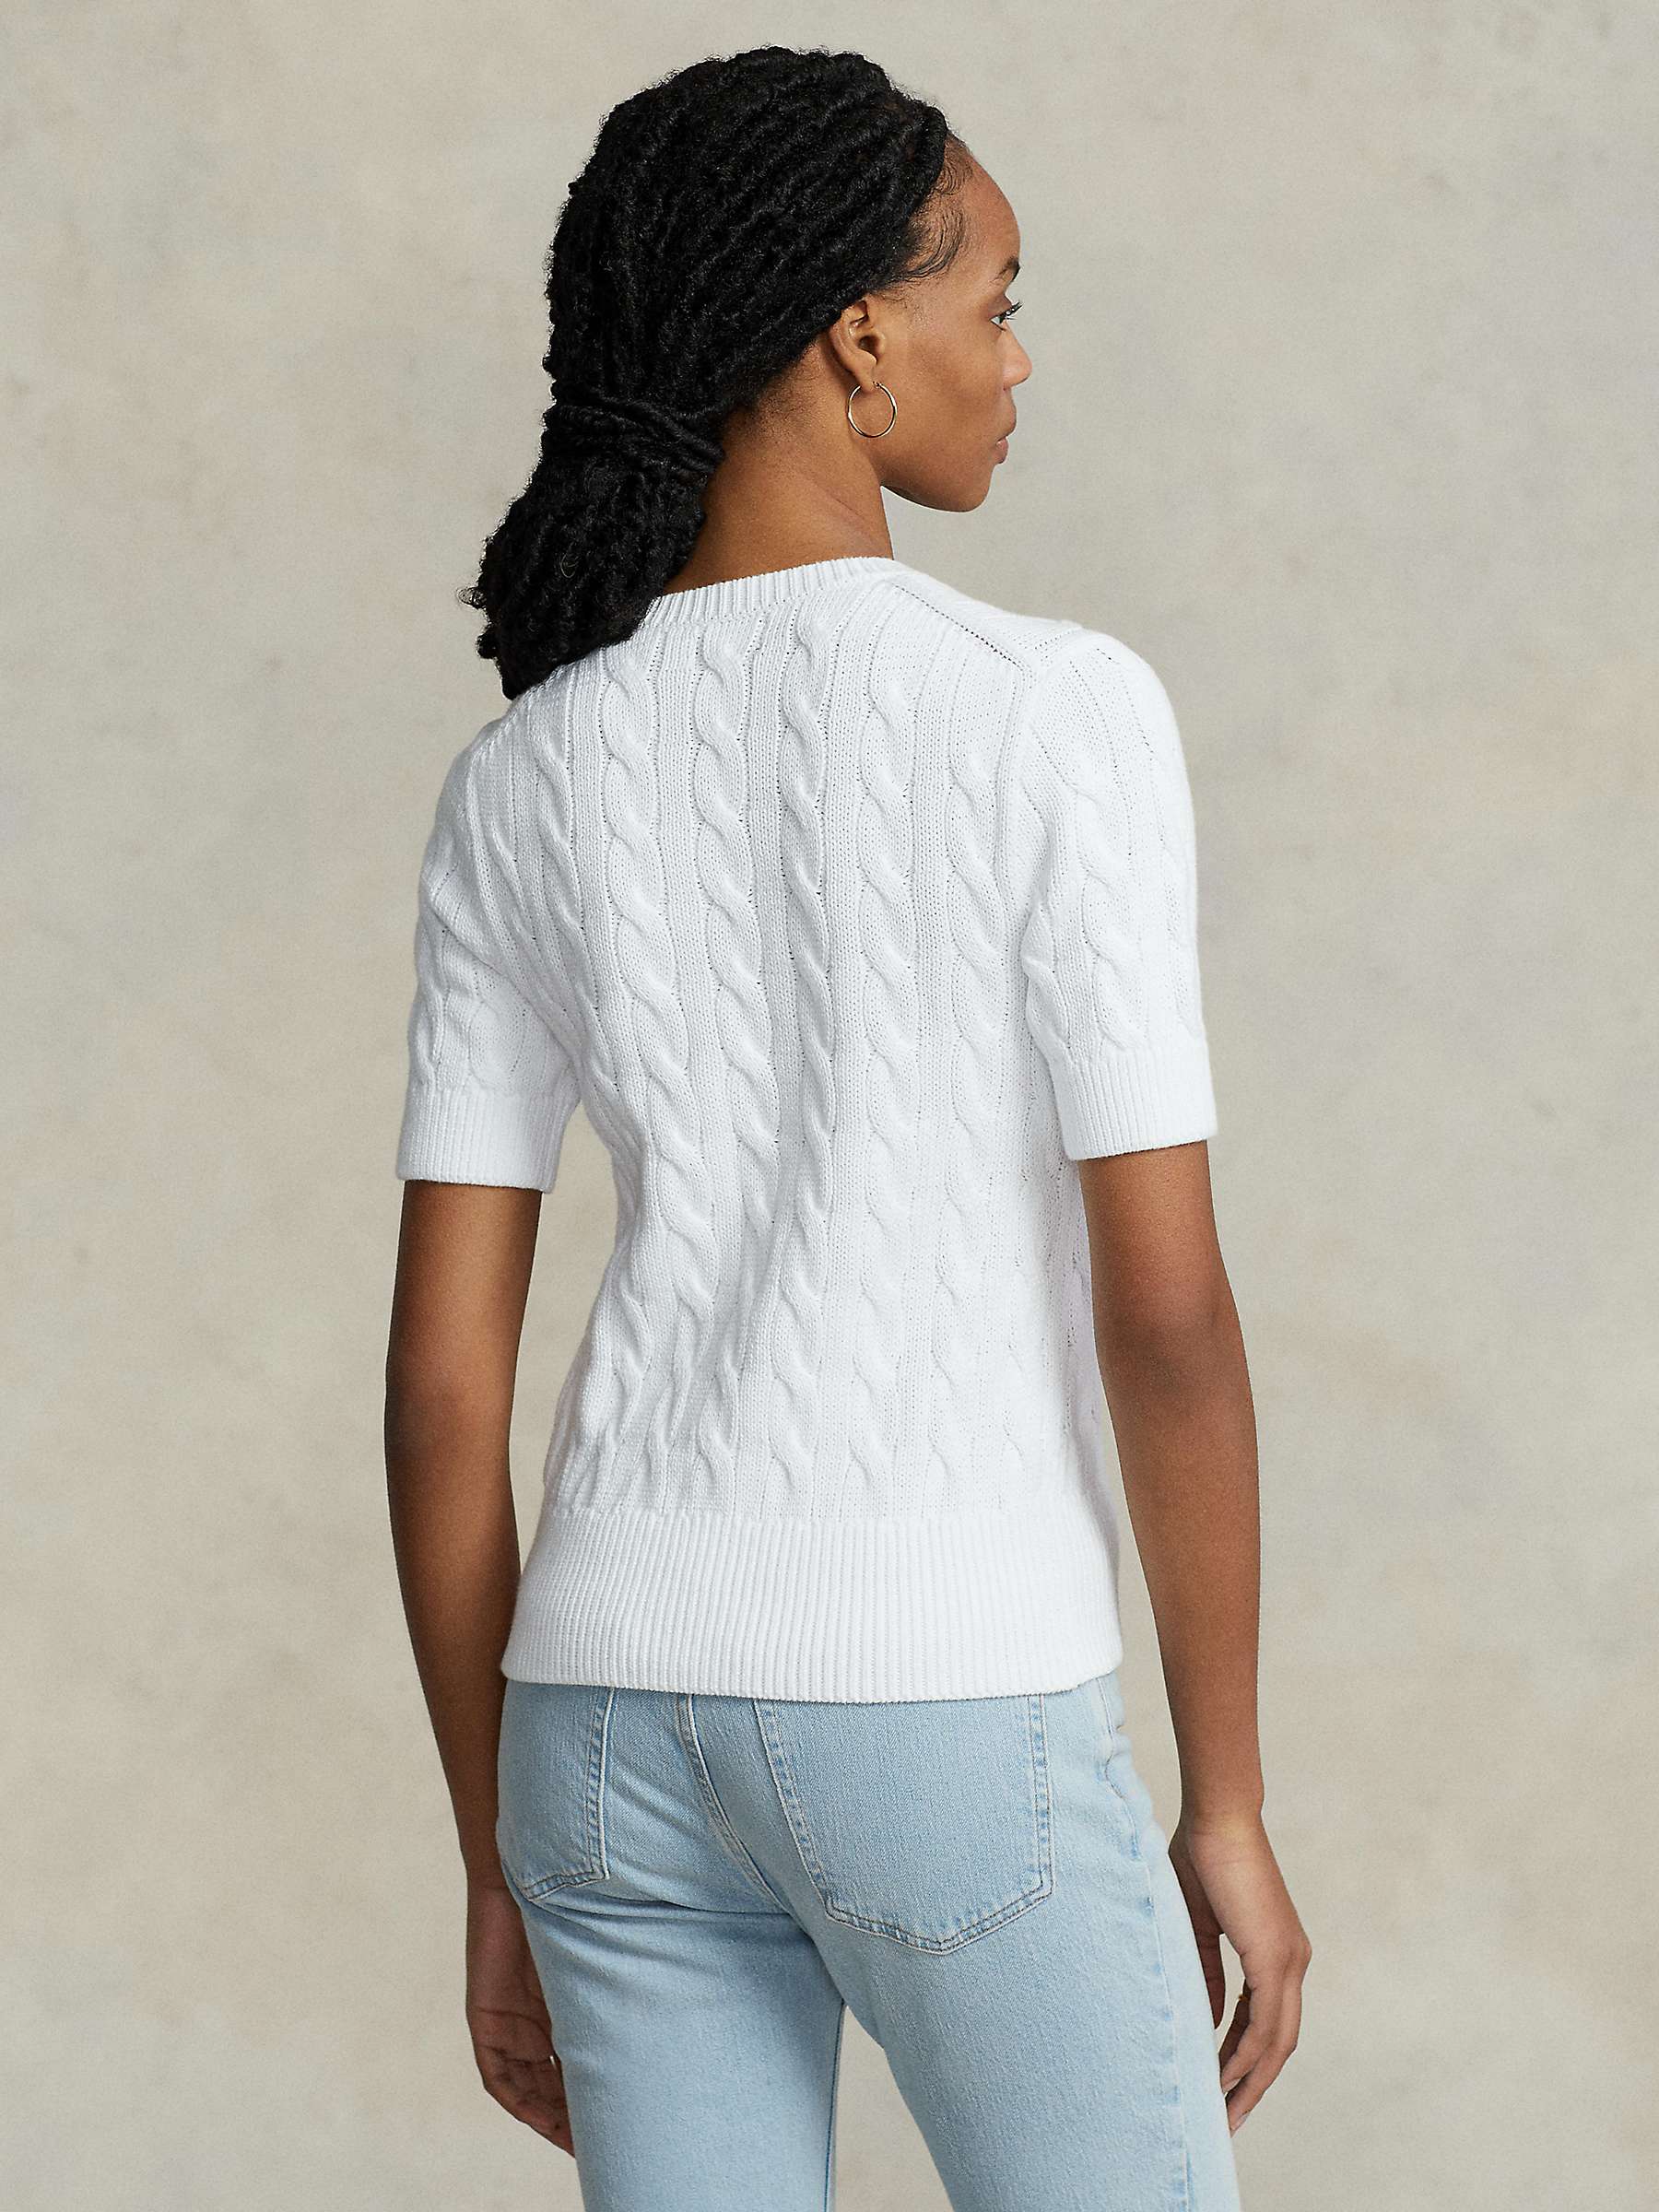 Buy Polo Ralph Lauren Cable Knit Short Sleeve Cardigan, White Online at johnlewis.com